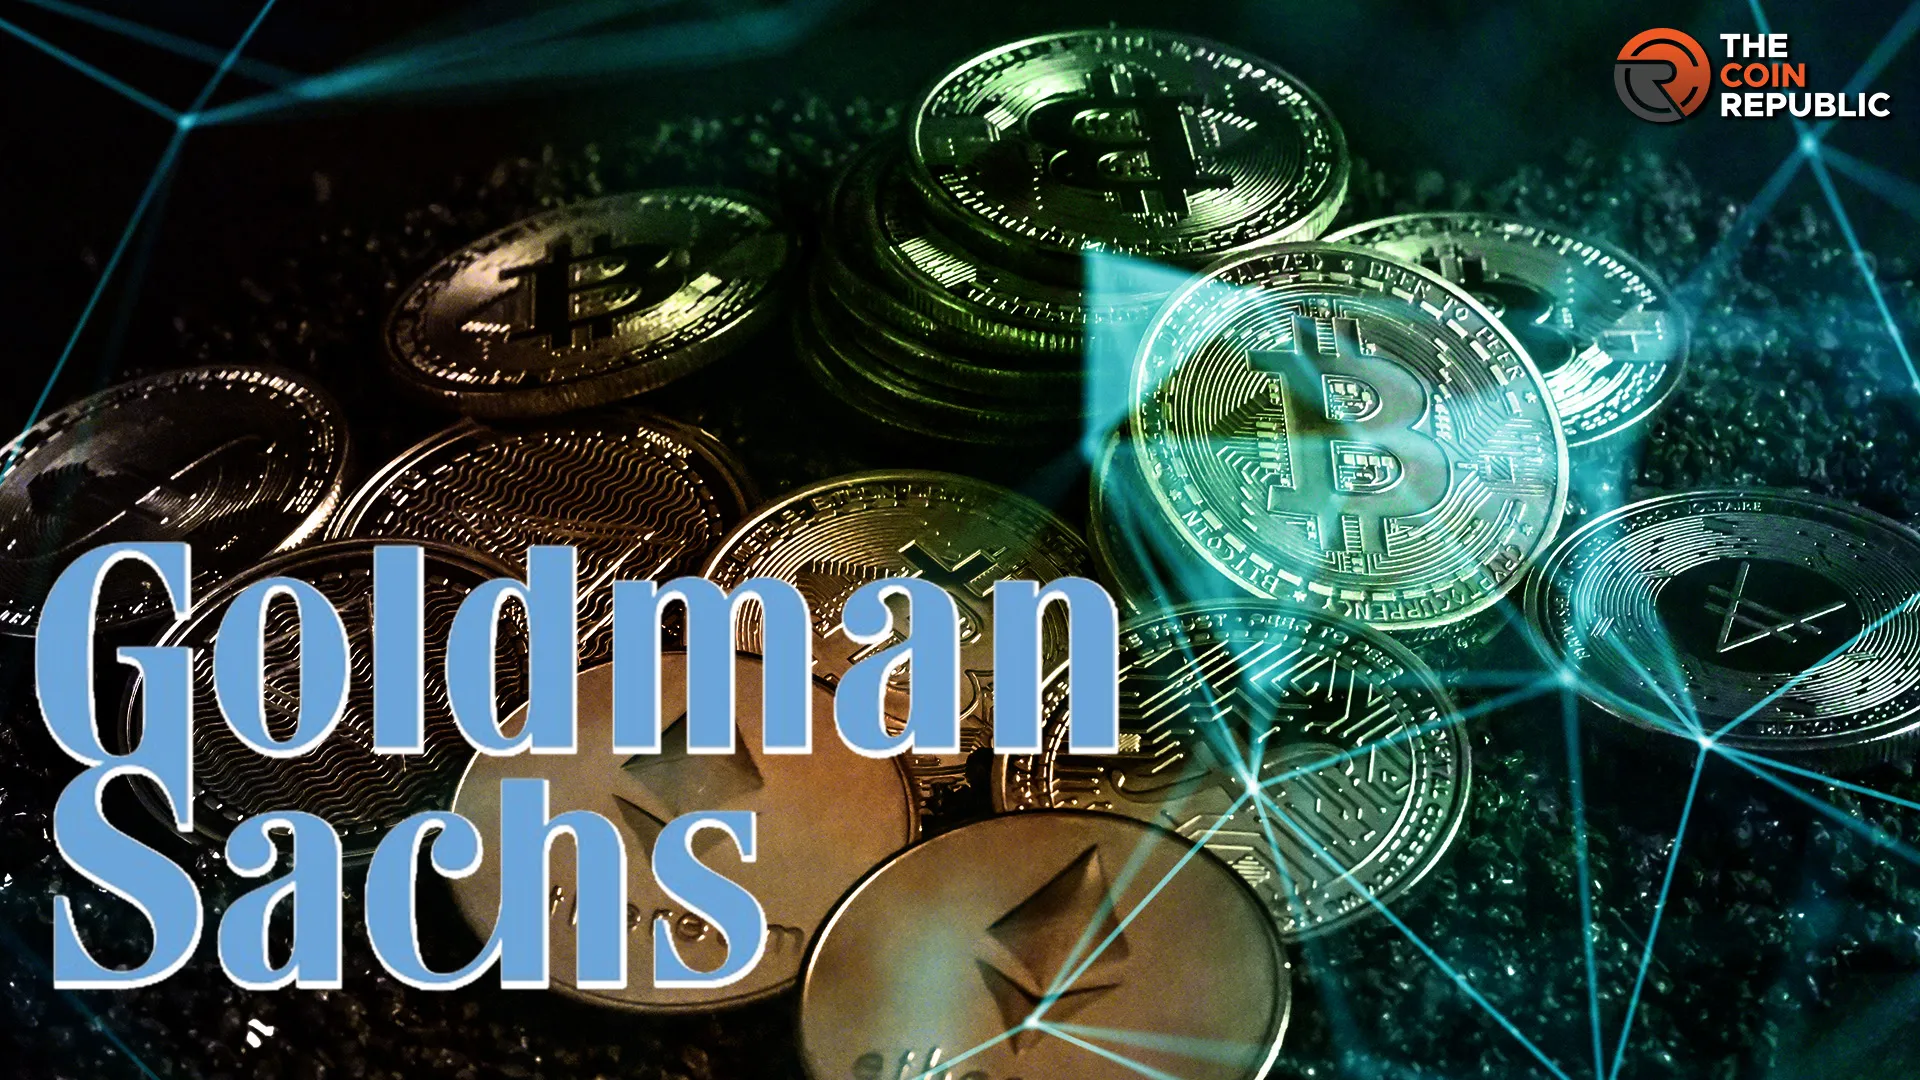 Goldman Sachs Clients’ Growing Interest in Crypto, Reports Shows